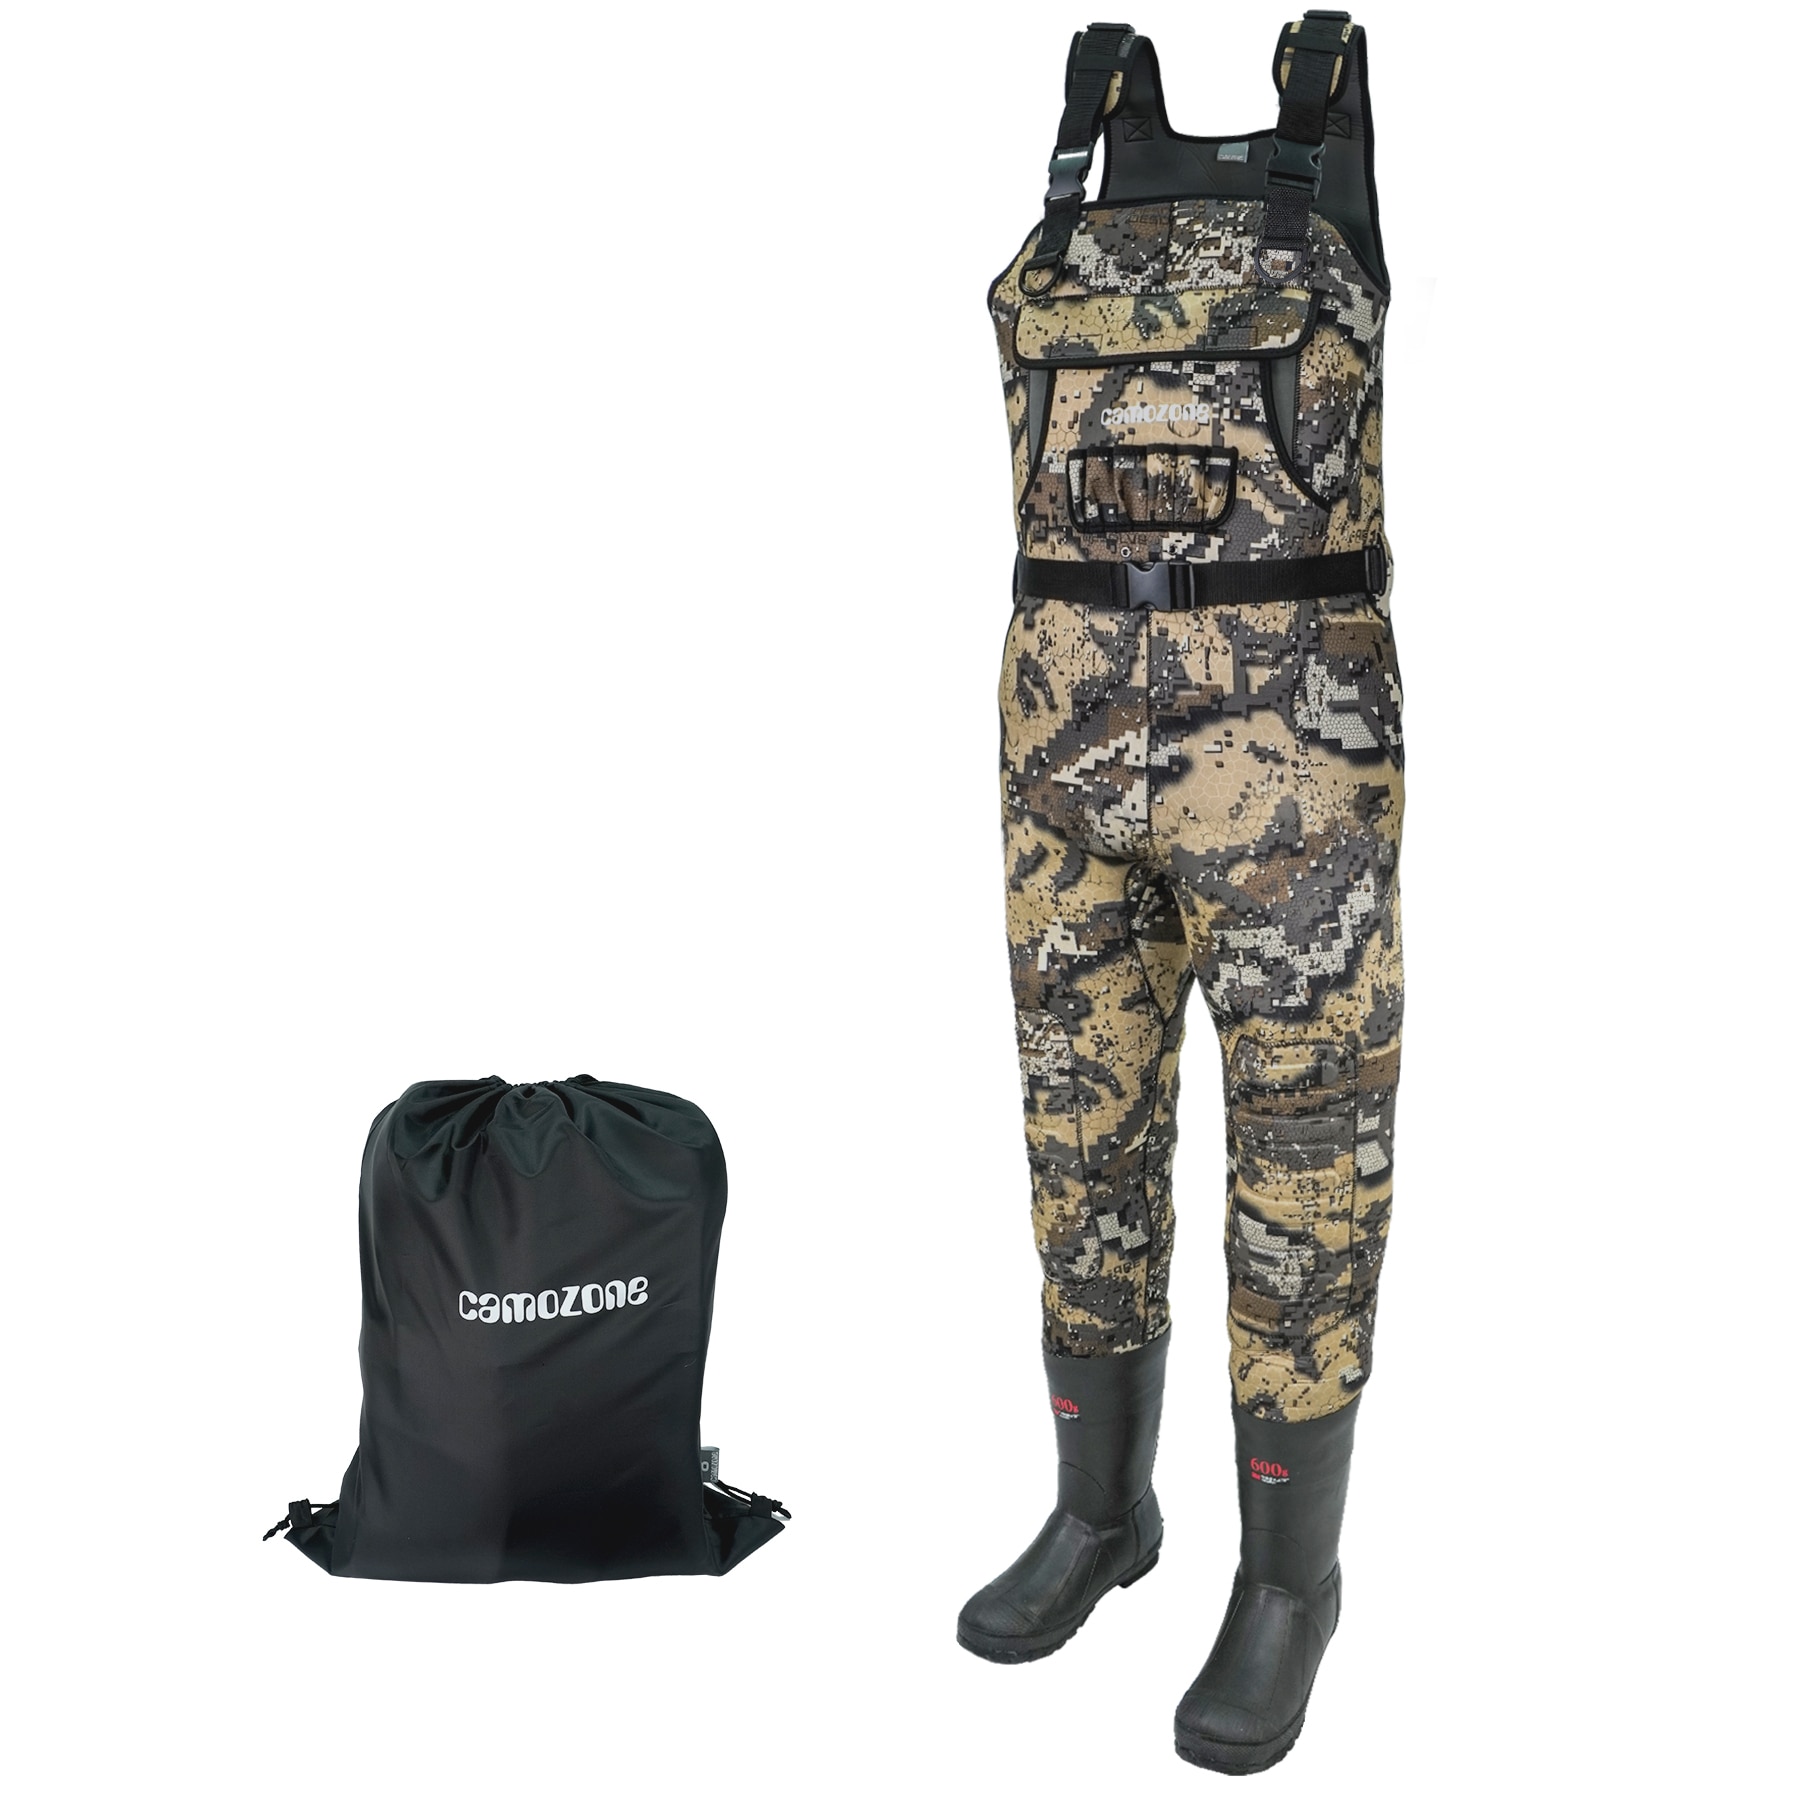 Neoprene Chest Waders with Boots-size7 Fishing Gear & Apparel at